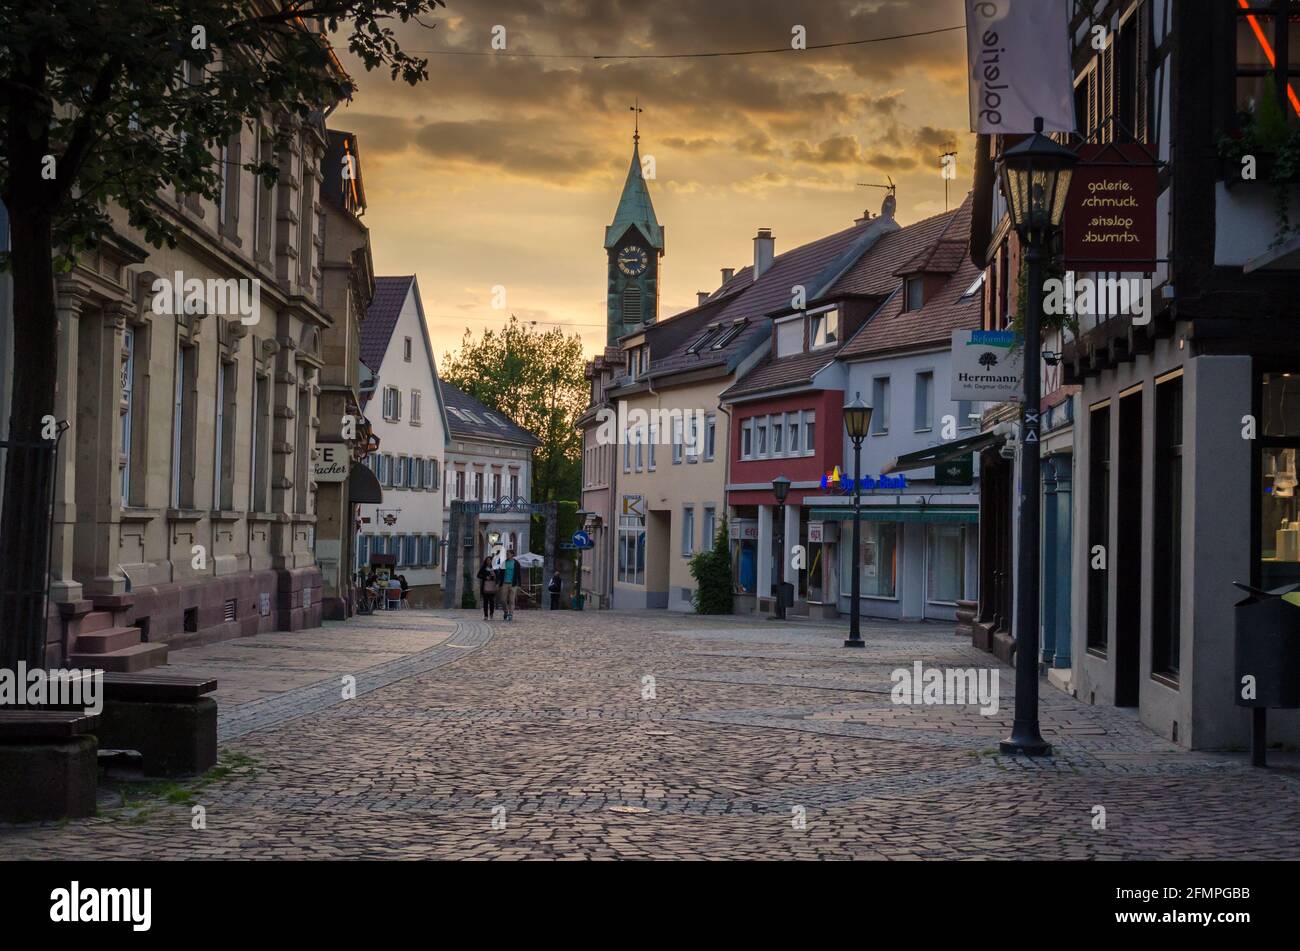 BRETTEN, GERMANY - Apr 18, 2021: Beautiful sunset light illuminating the old part of Bretten town in Germany. Stock Photo